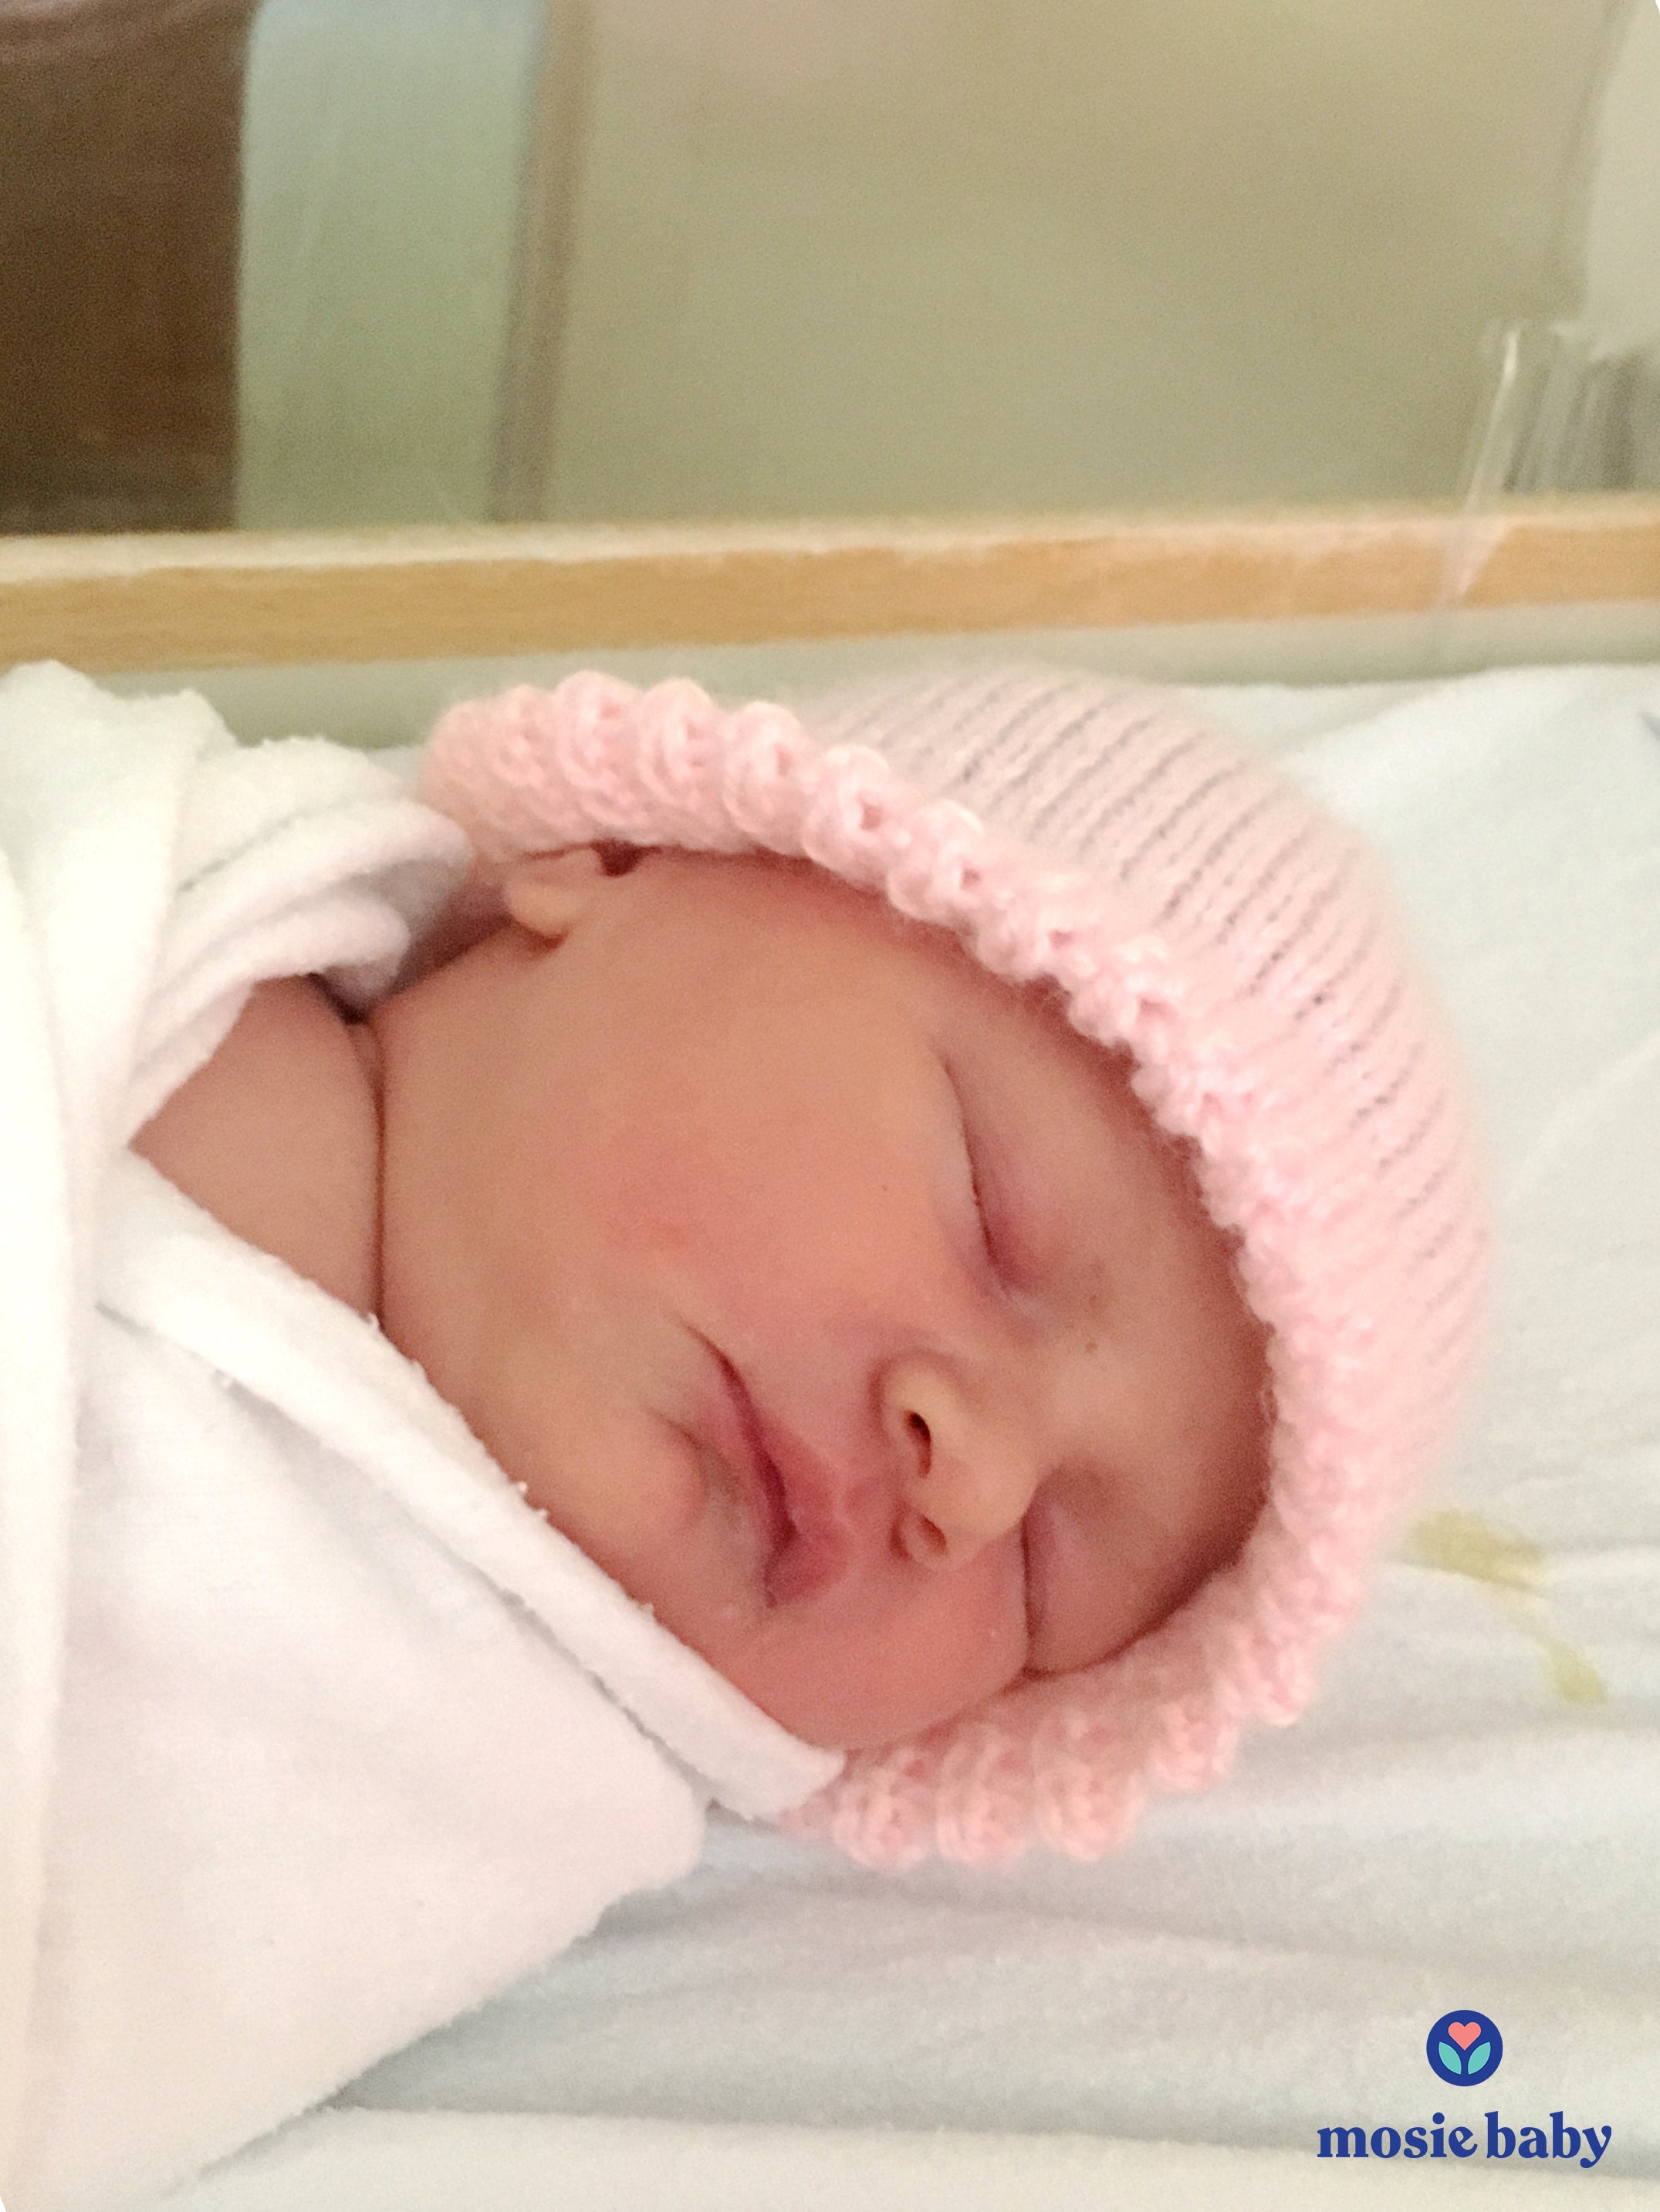 newborn baby with a pink hat